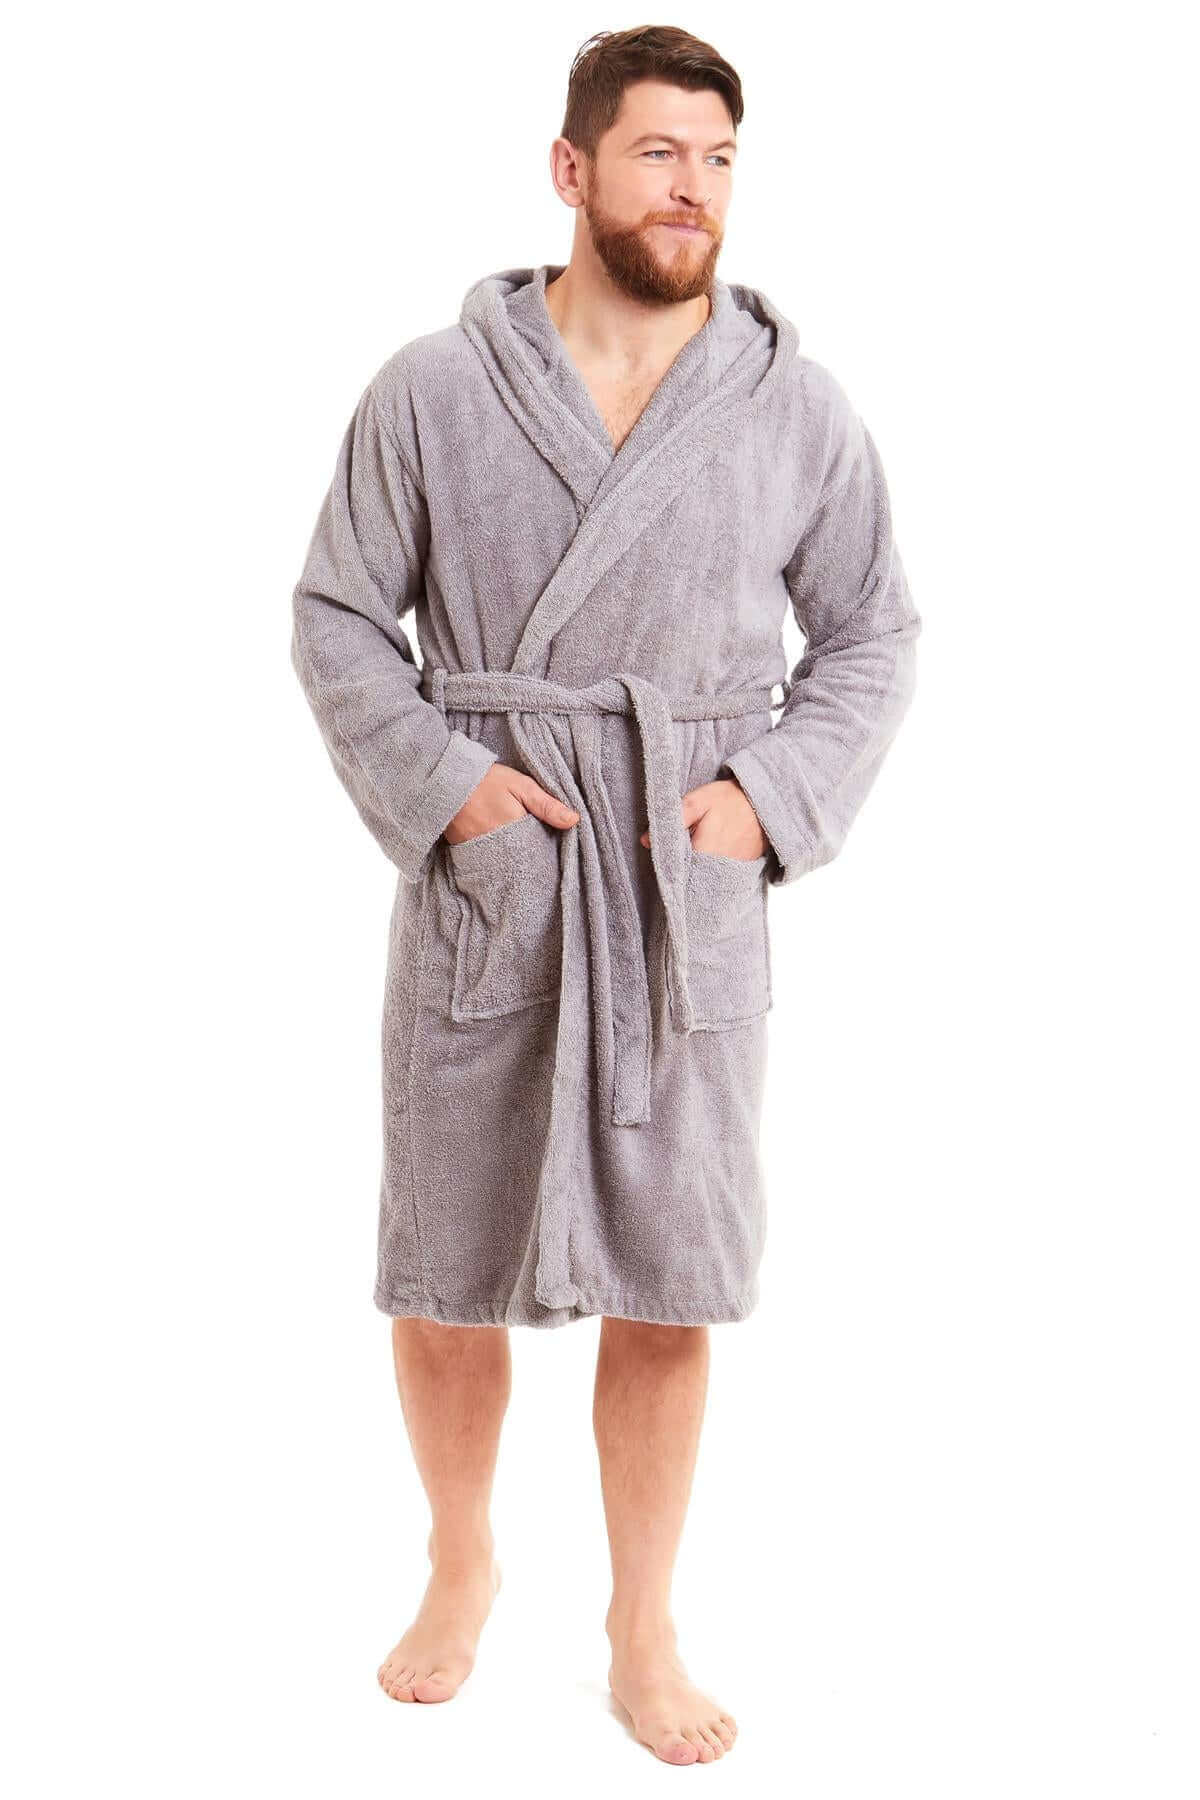 Men's Bamboo Hooded Dressing Gown Towelling Bath Robes. Buy now for £20.00. A Robe by Toro Rocco. 12-14, 16-18, 20-22, bamboo, bathrobe, bathwrap, boys, cuddly, dressing, dressing gown, elasticated, gowns, grey, gym, home, hooded, hotel, housecoat, large,